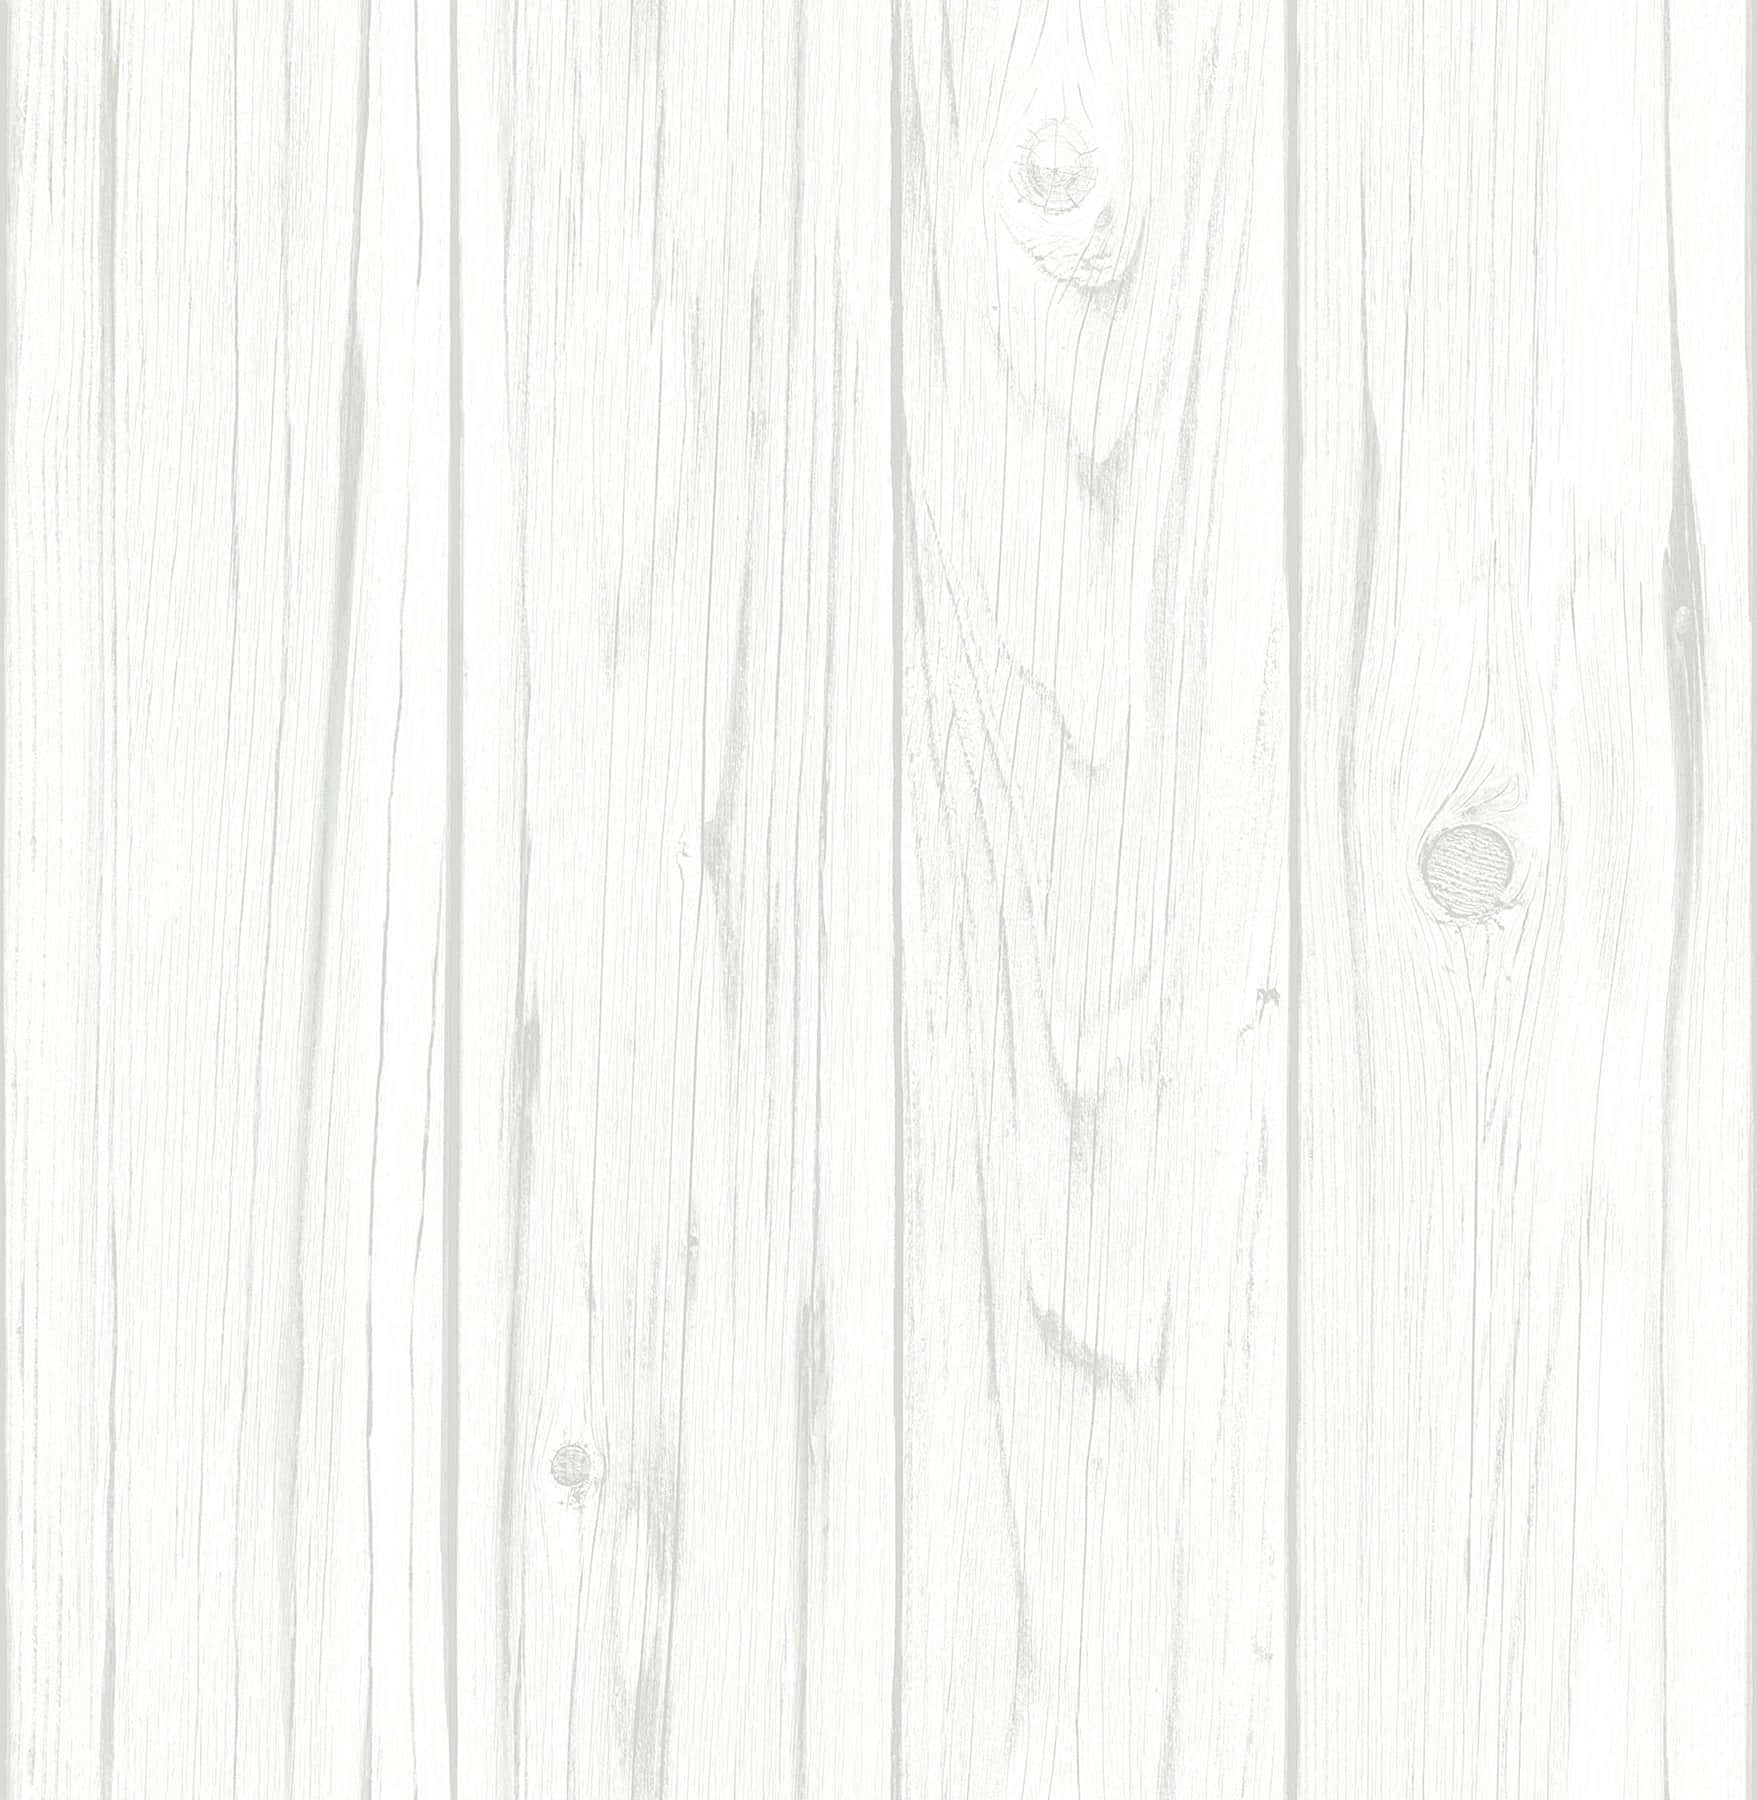 Faint Lines White Wood Background